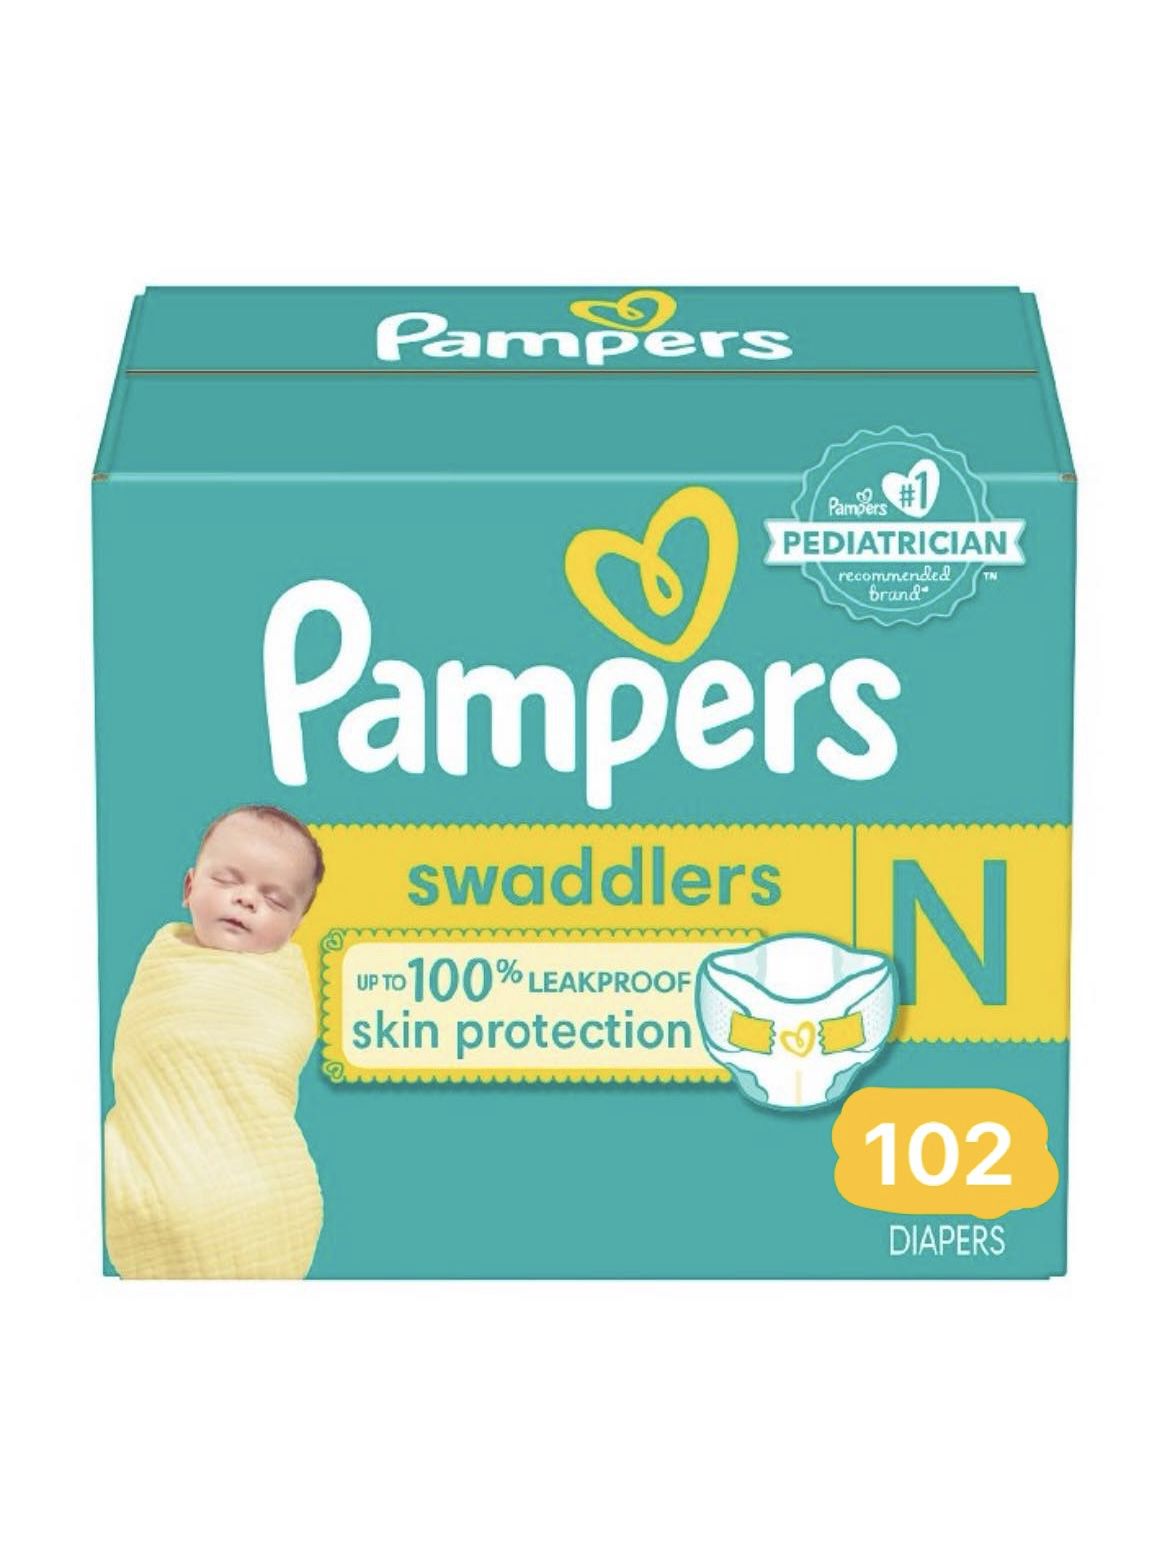 Pampers Swaddlers Diapers 